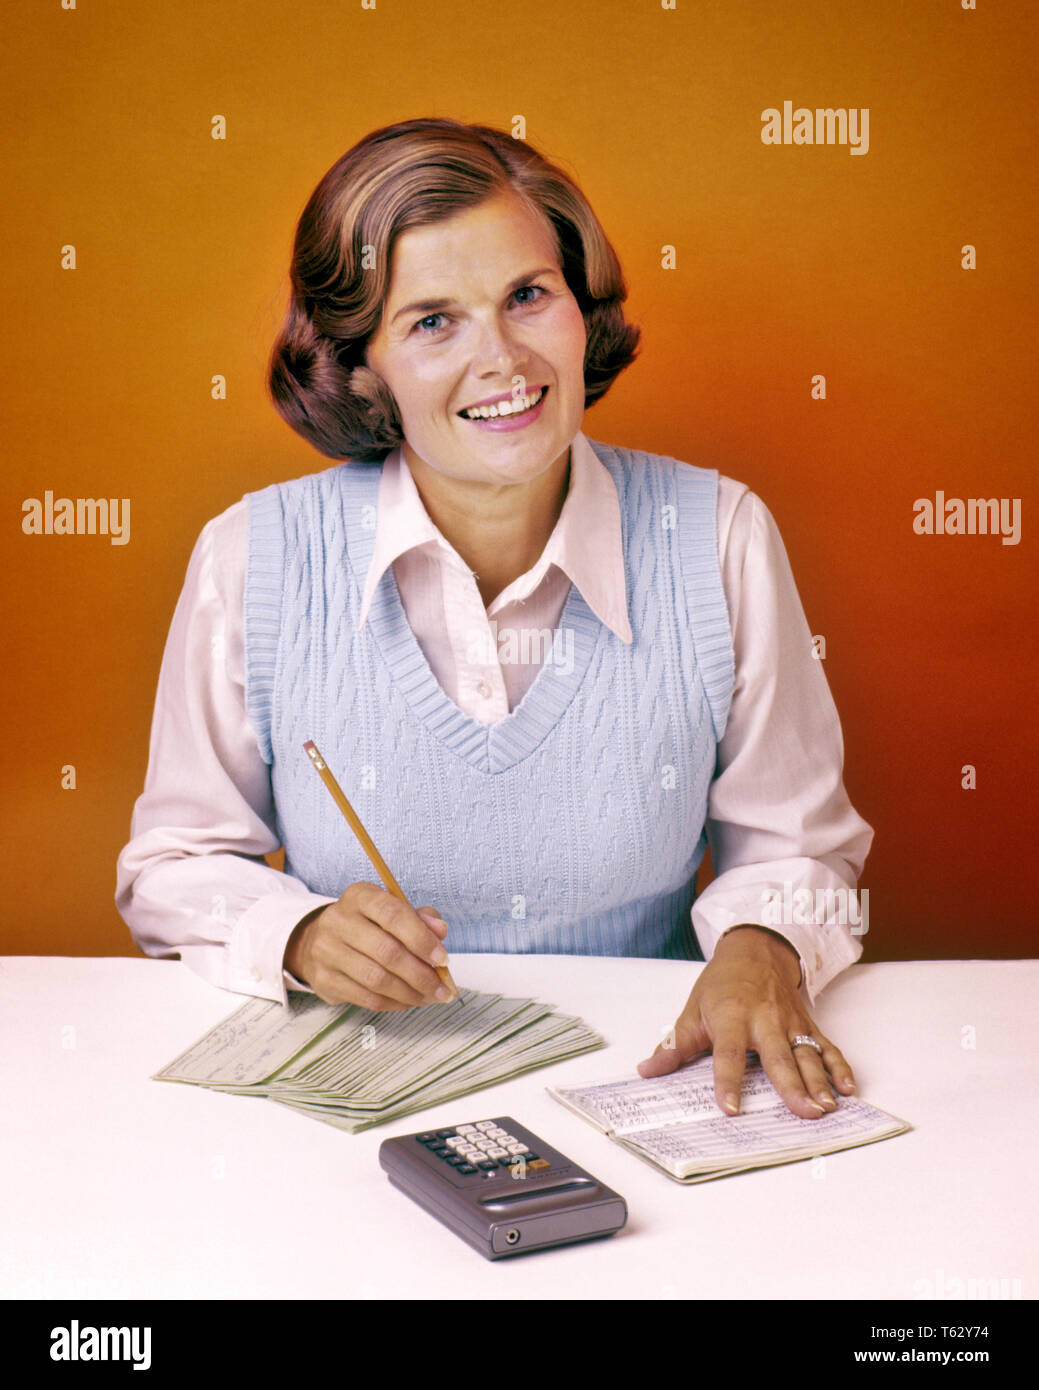 1970s SMILING WOMAN LOOKING AT CAMERA BALANCING HER CHECKBOOK USING CALCULATOR  - ks15032 BAN001 HARS EYE CONTACT GOALS HOMEMAKER HAPPINESS HOMEMAKERS CHEERFUL CHORE CHECKBOOK HOUSEWIVES OCCUPATIONS SMILES USING JOYFUL PERSONAL FINANCE MID-ADULT MID-ADULT WOMAN CAUCASIAN ETHNICITY OLD FASHIONED Stock Photo